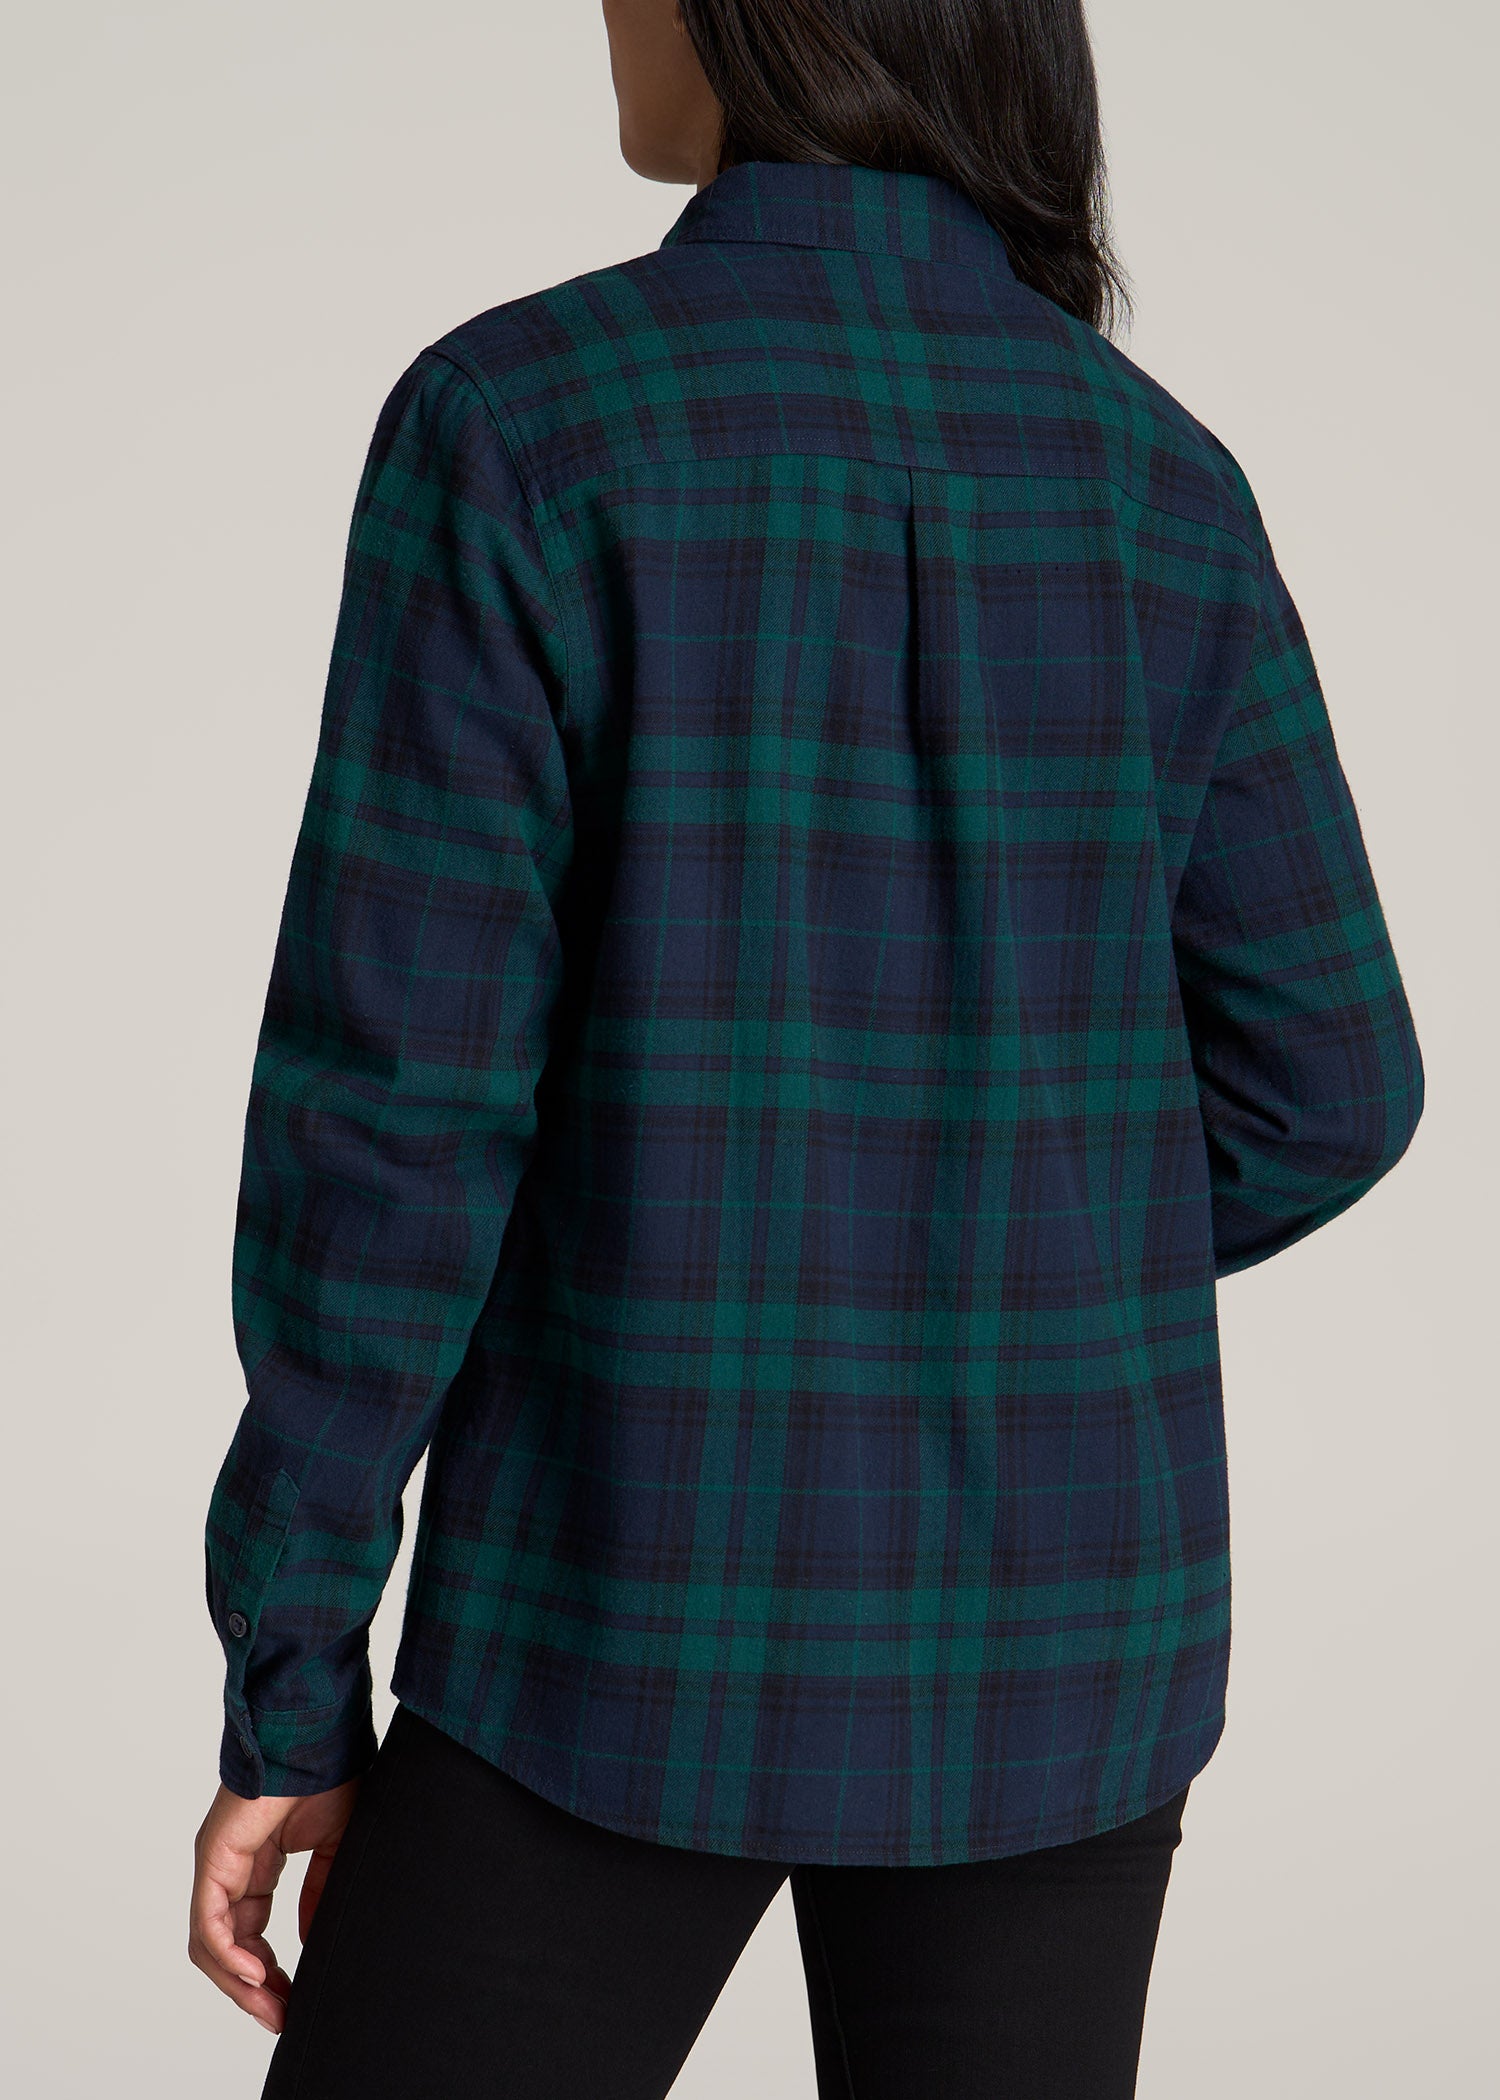 Flannel Button-Up Shirt for Tall Women in Emerald and Navy